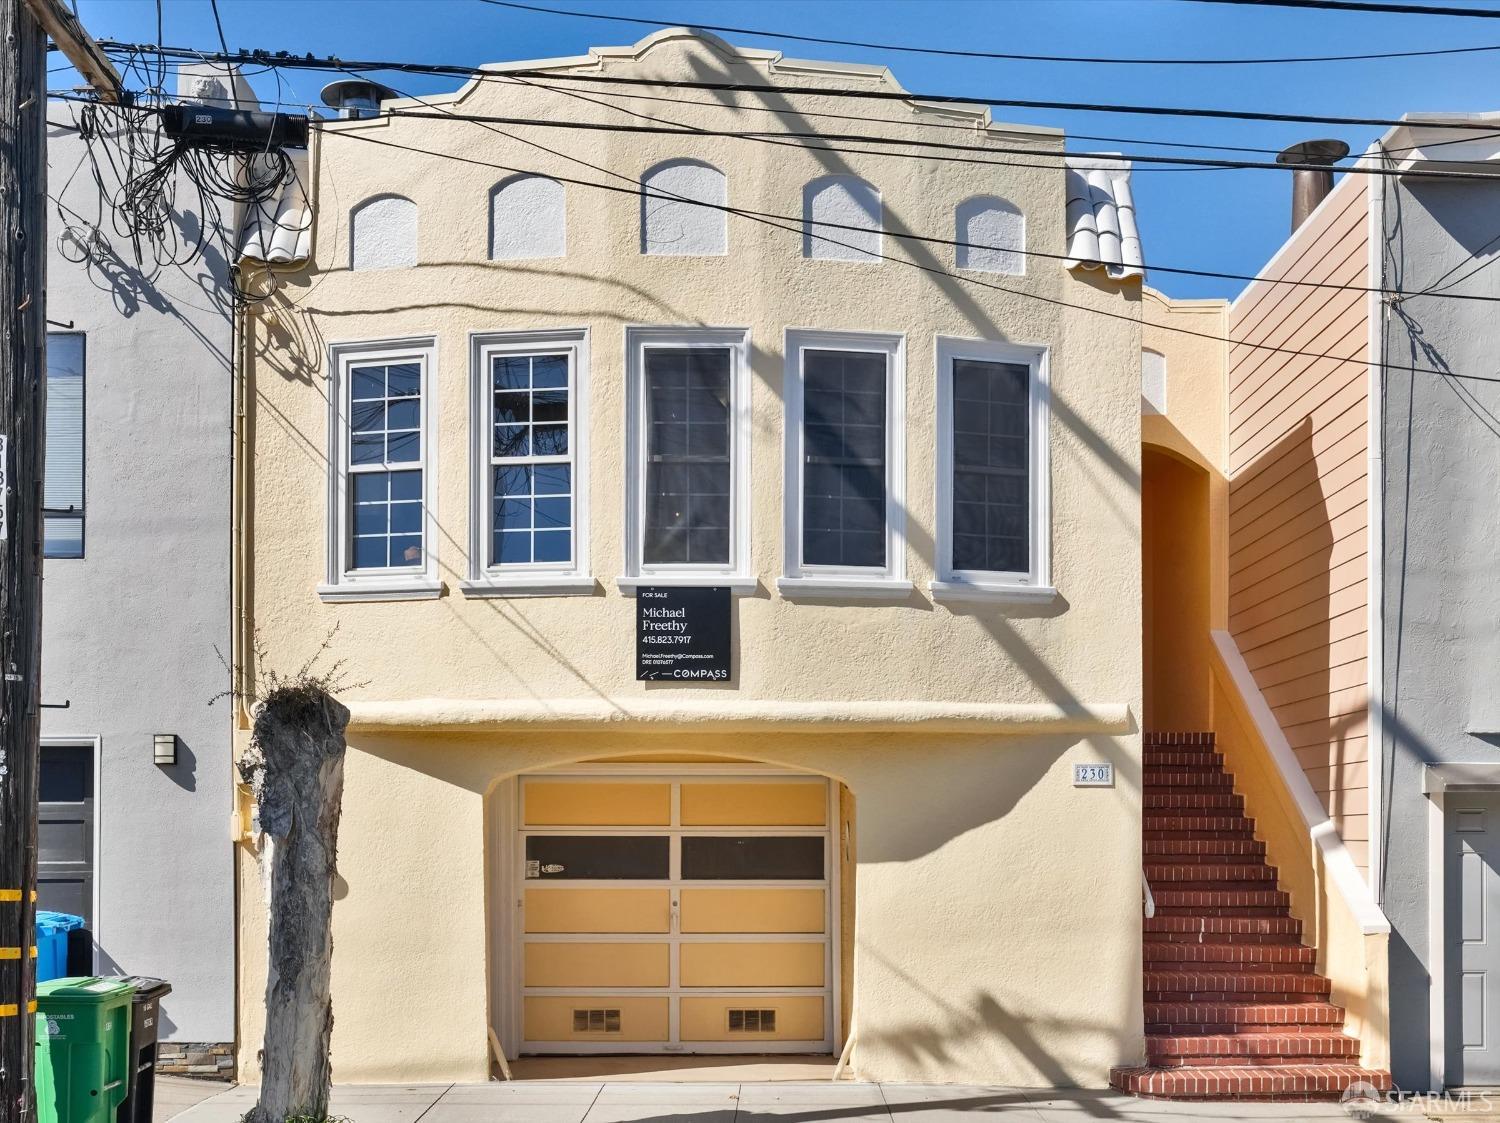 Photo of 230 Hale St in San Francisco, CA